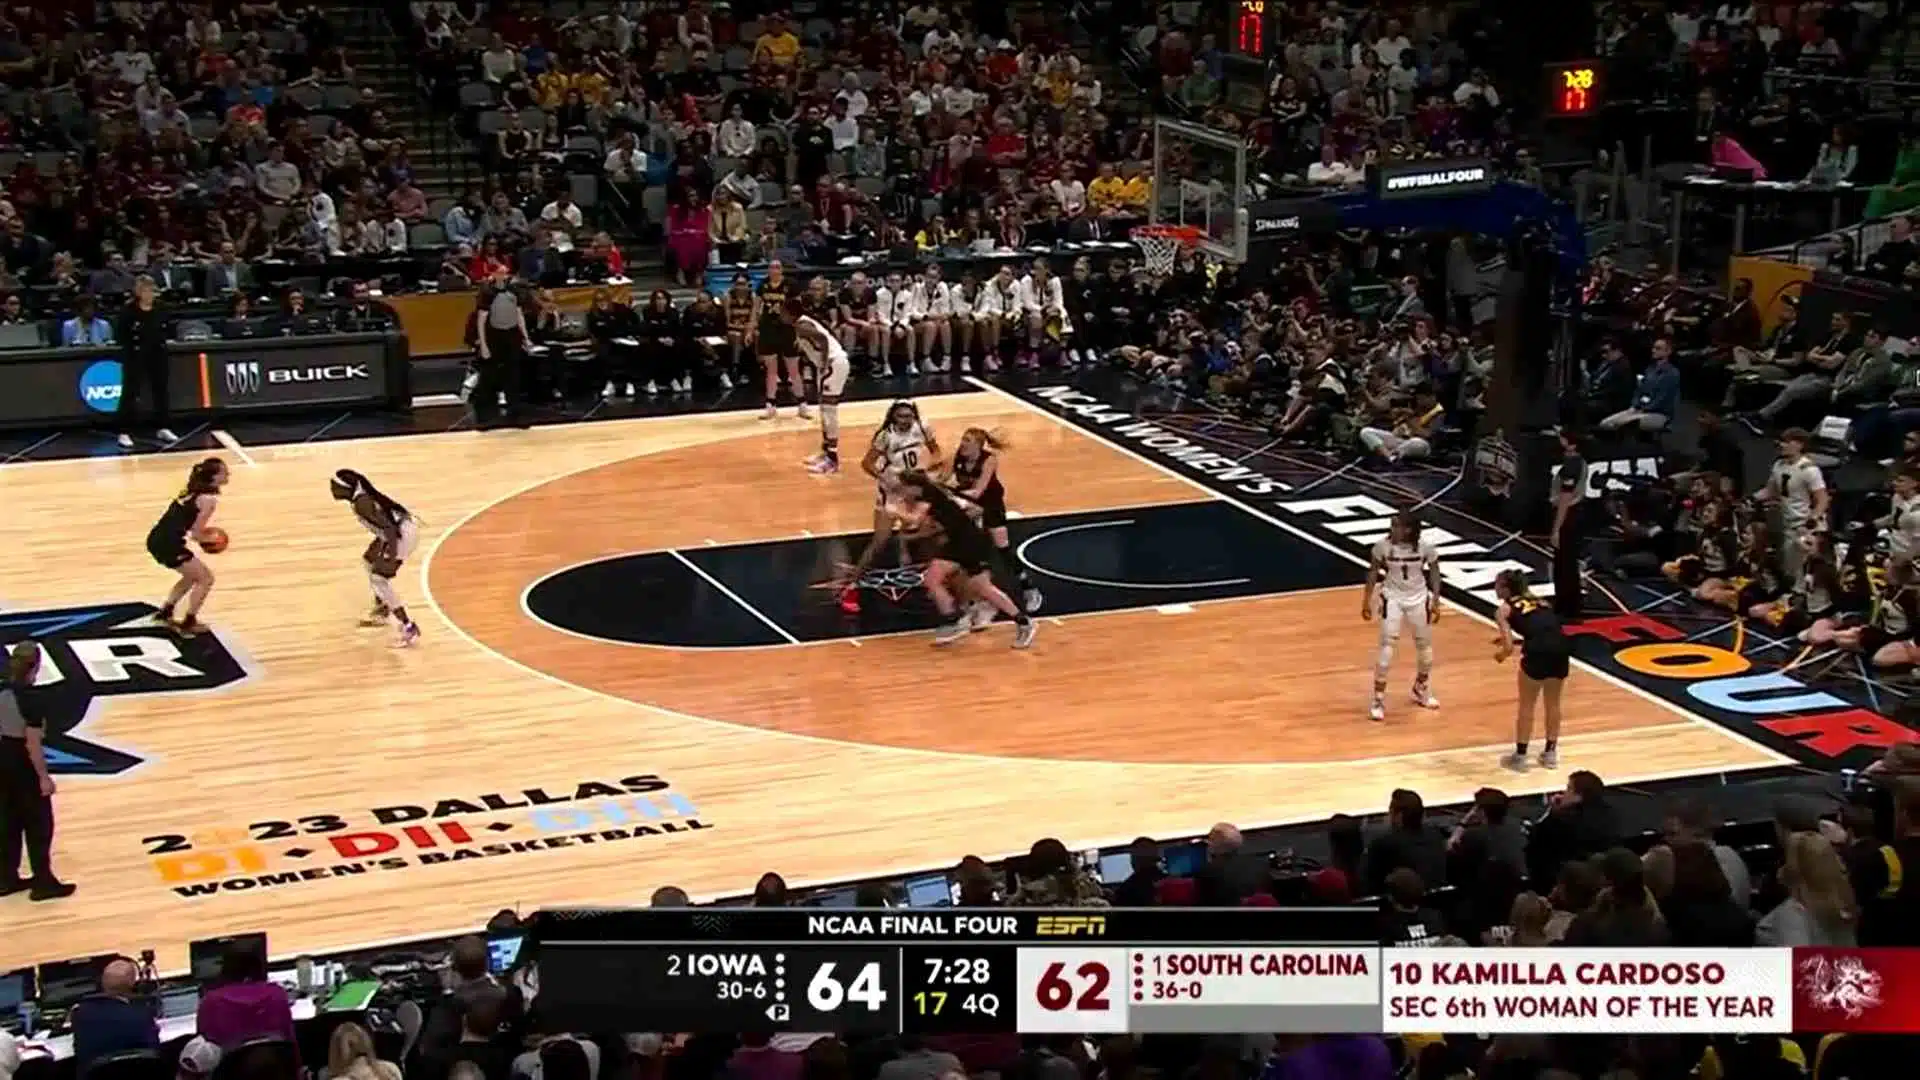 Iowa’s Catlin Clark takes down Undefeated South Carolina in the Final Four